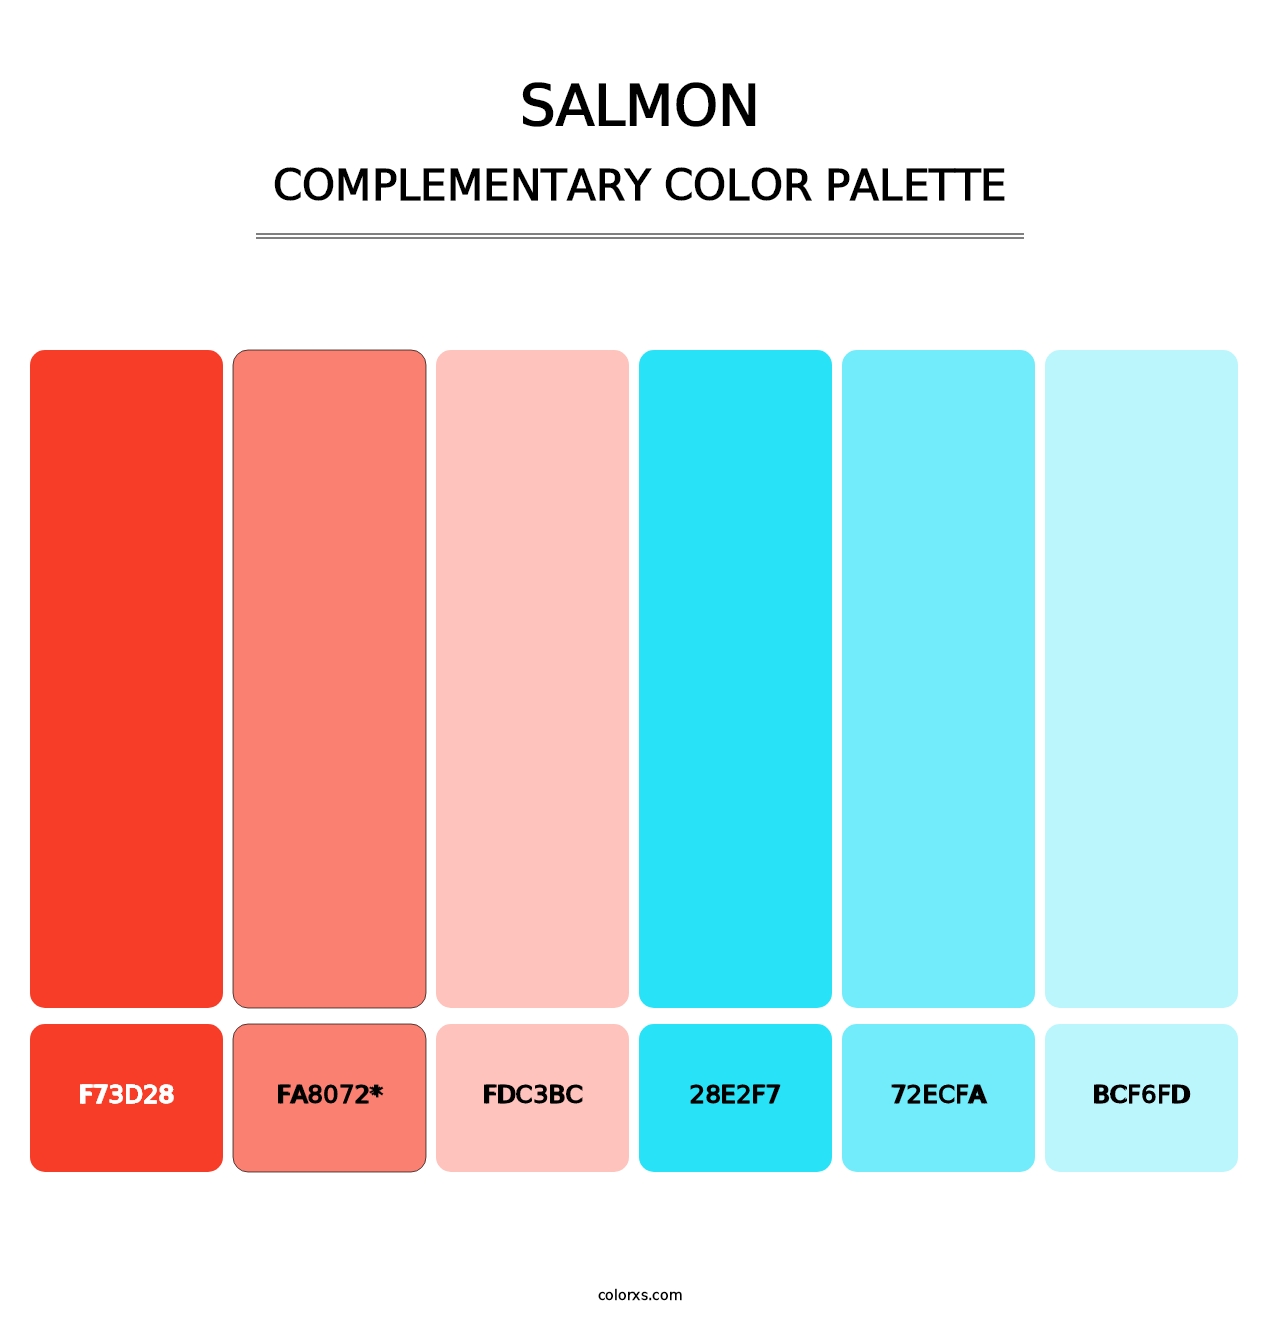 Salmon - Complementary Color Palette